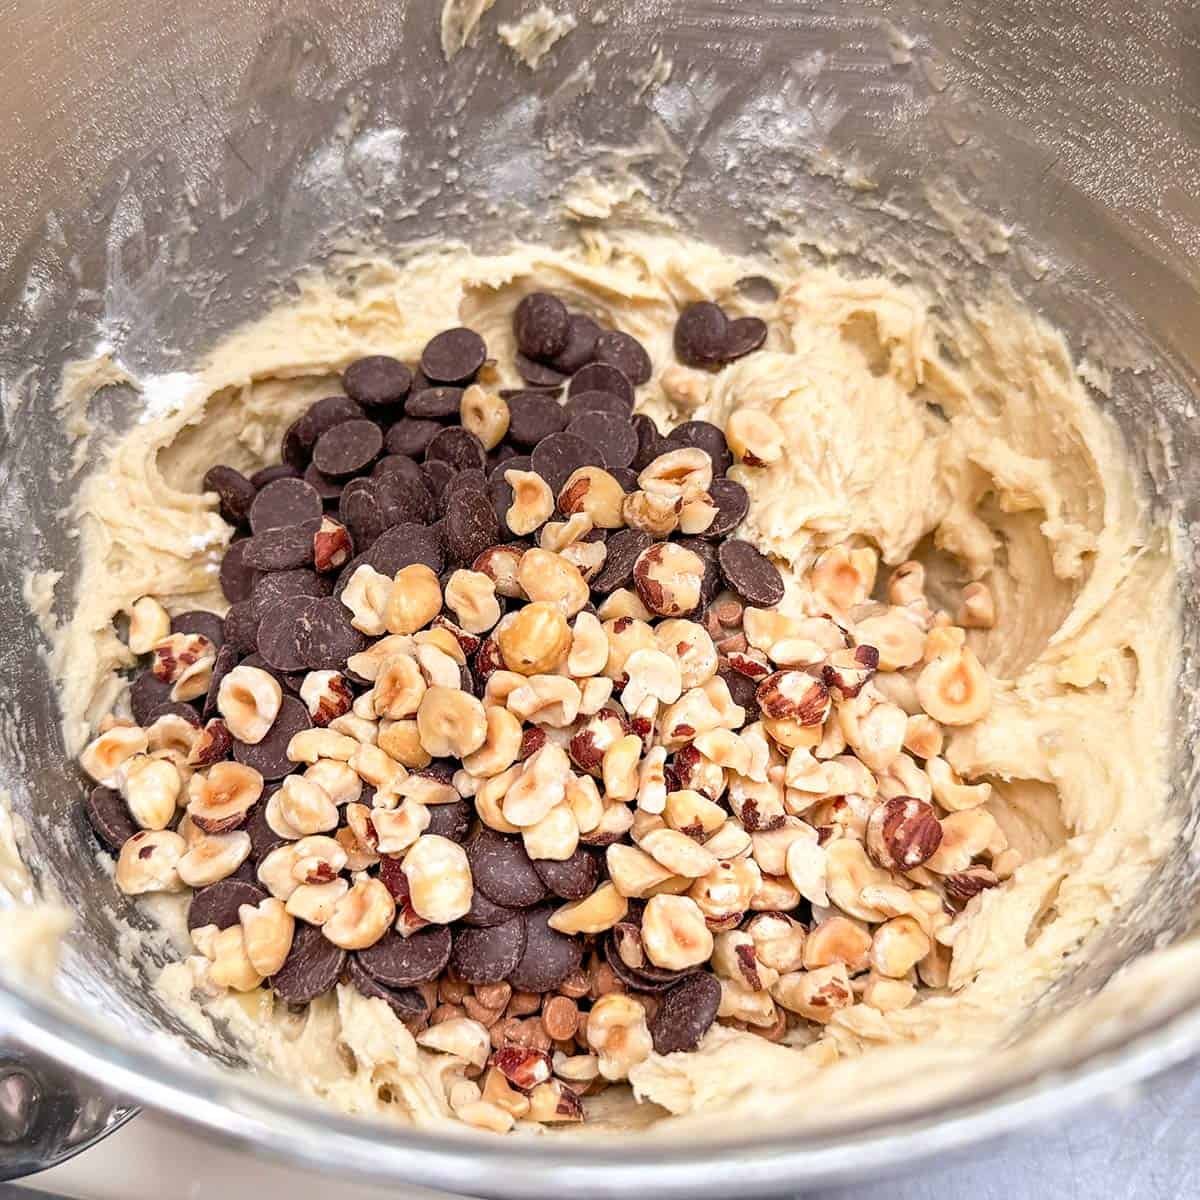 Adding the chocolate and caramel chips along with the chopped hazelnuts to the cookie dough.